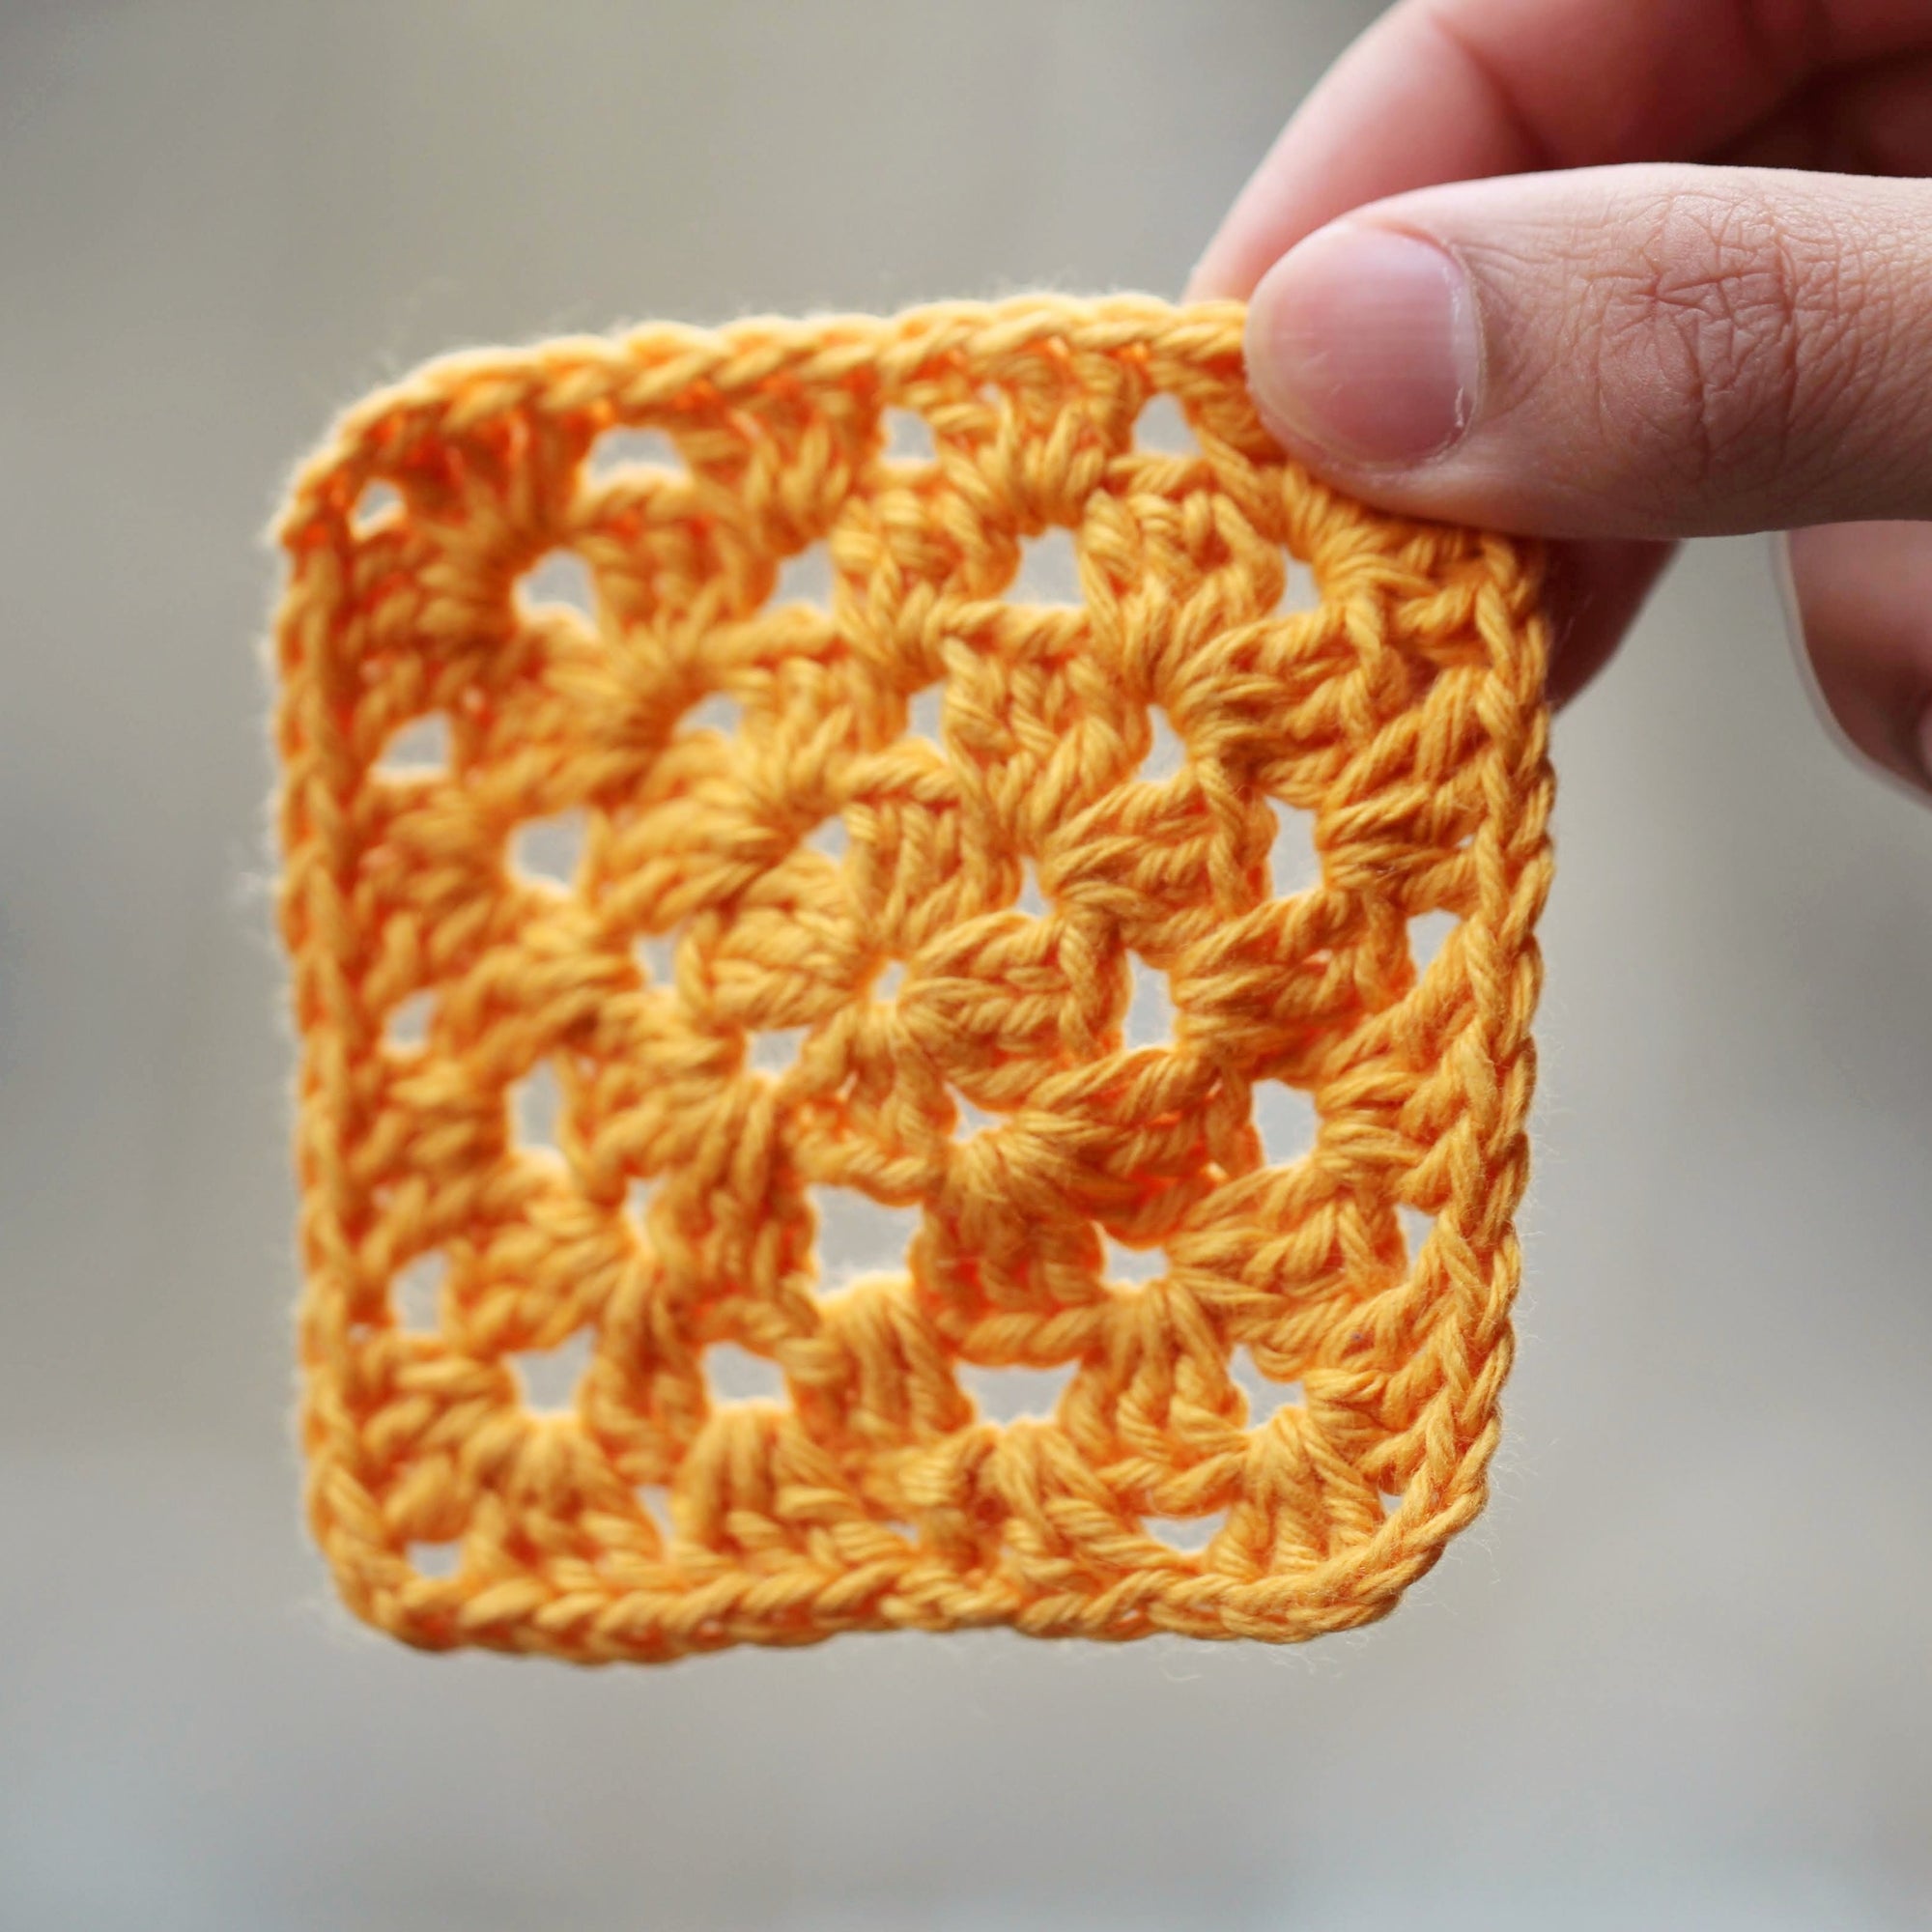  A light orange crocheted granny square being held up by a hand against a blurry background.